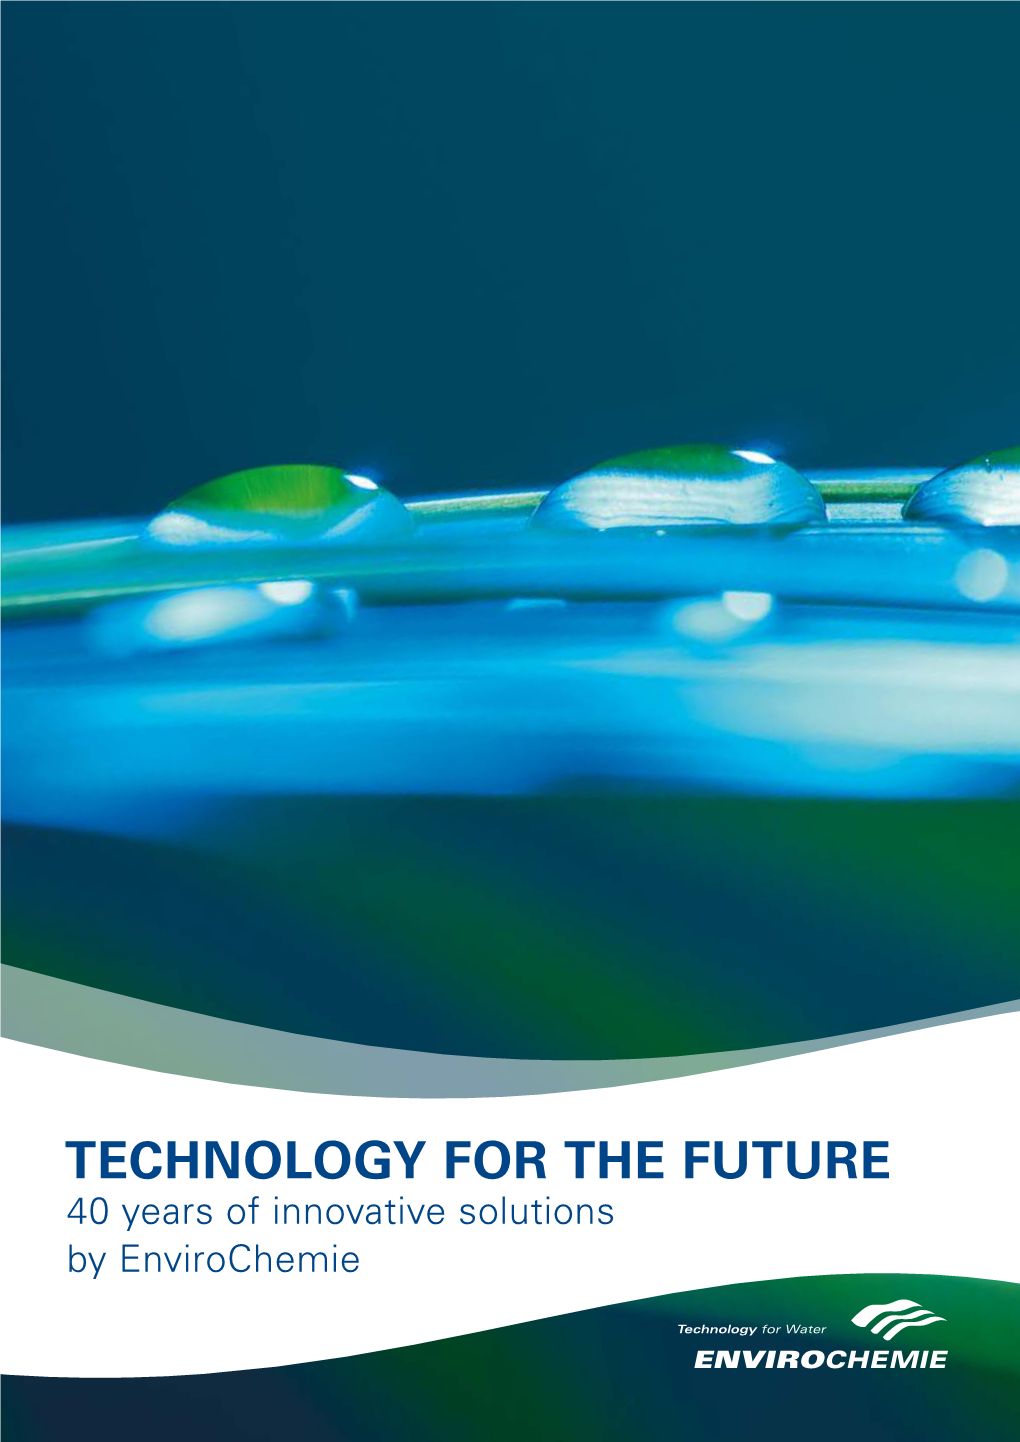 TECHNOLOGY for the FUTURE 40 Years of Innovative Solutions by Envirochemie “INNOVATIONS GIVE the FUTURE a FUTURE.”